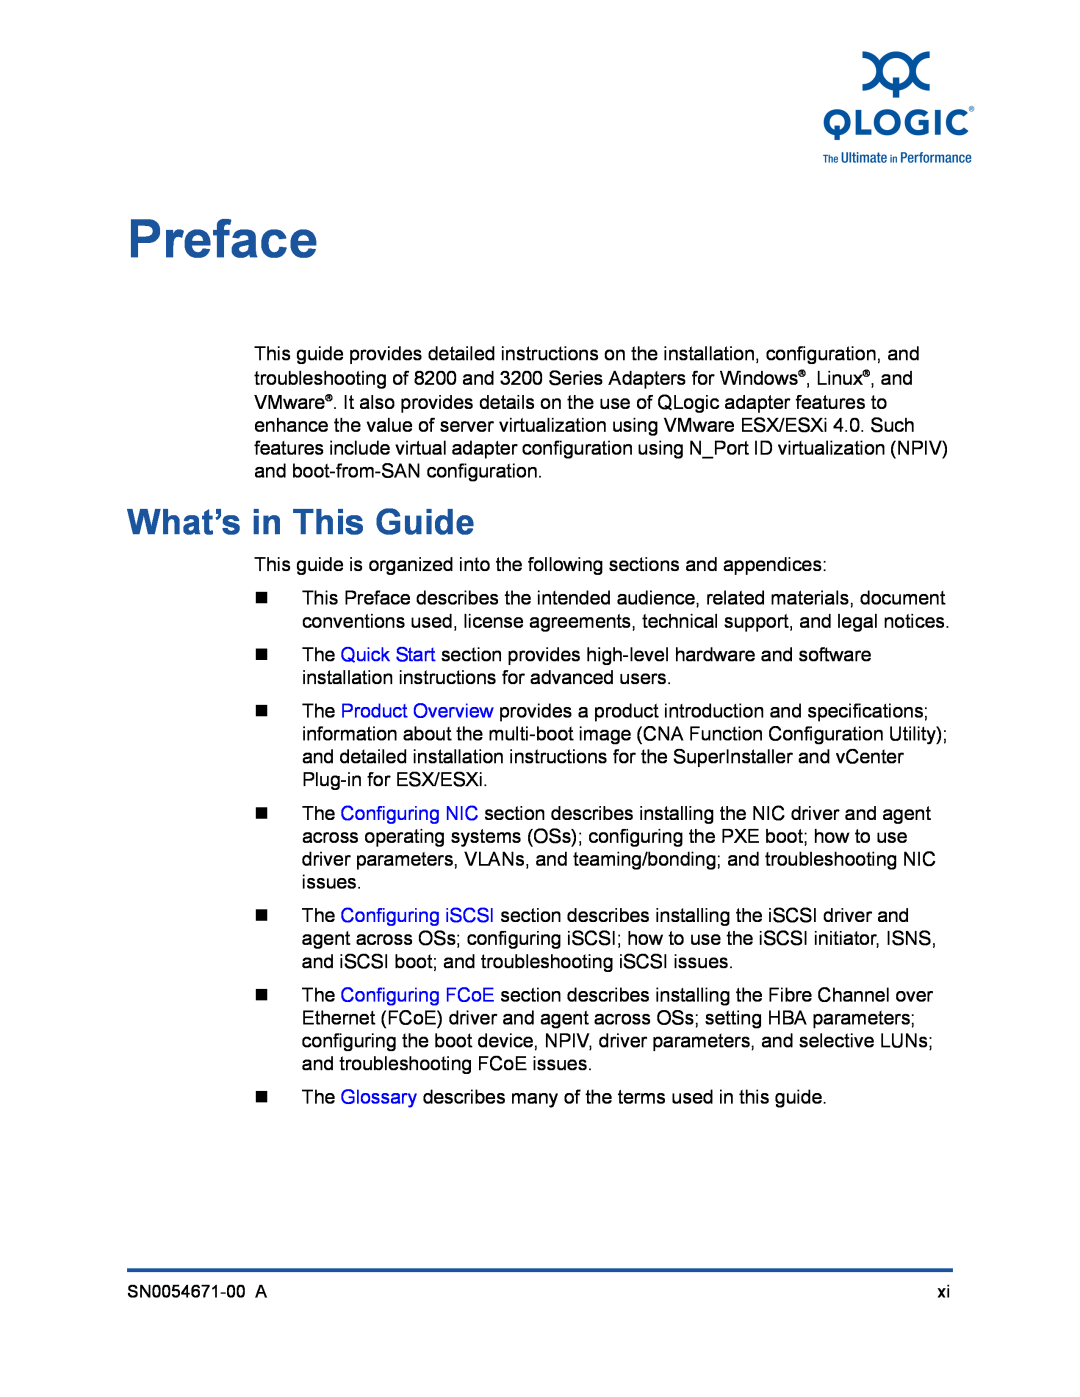 Q-Logic 3200, 8200 manual Preface, What’s in This Guide 